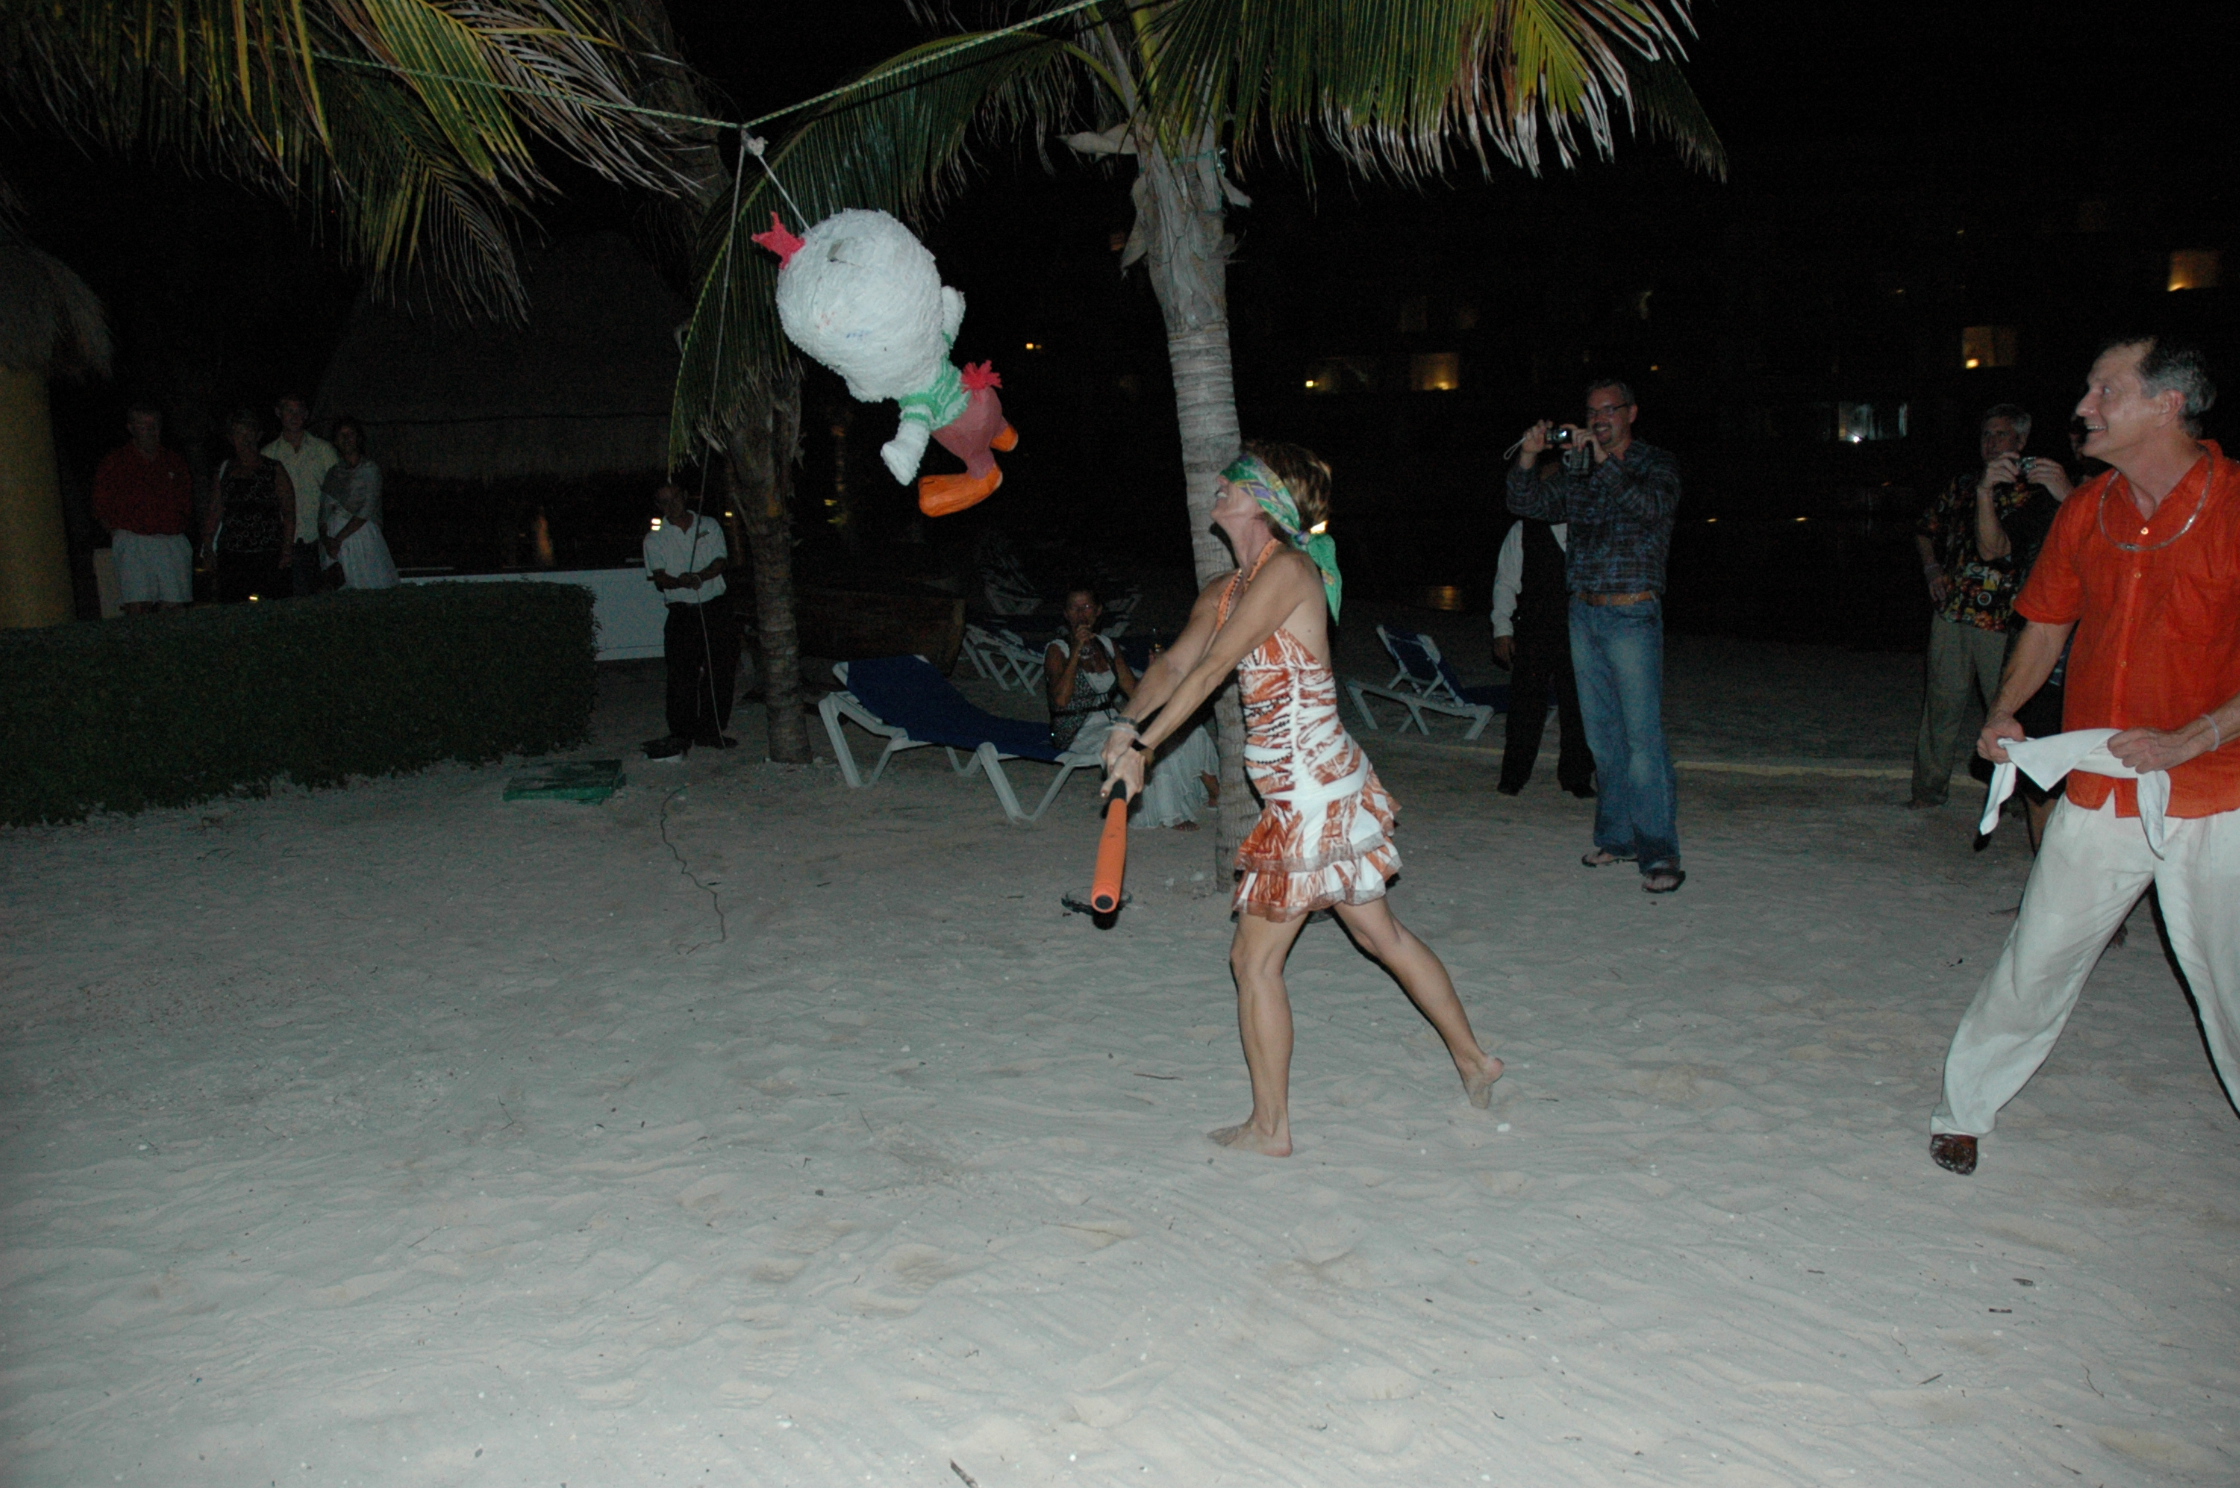 Next came the Mexican Pinata... rid yourself of six bad habits.   Jytte imagines six 